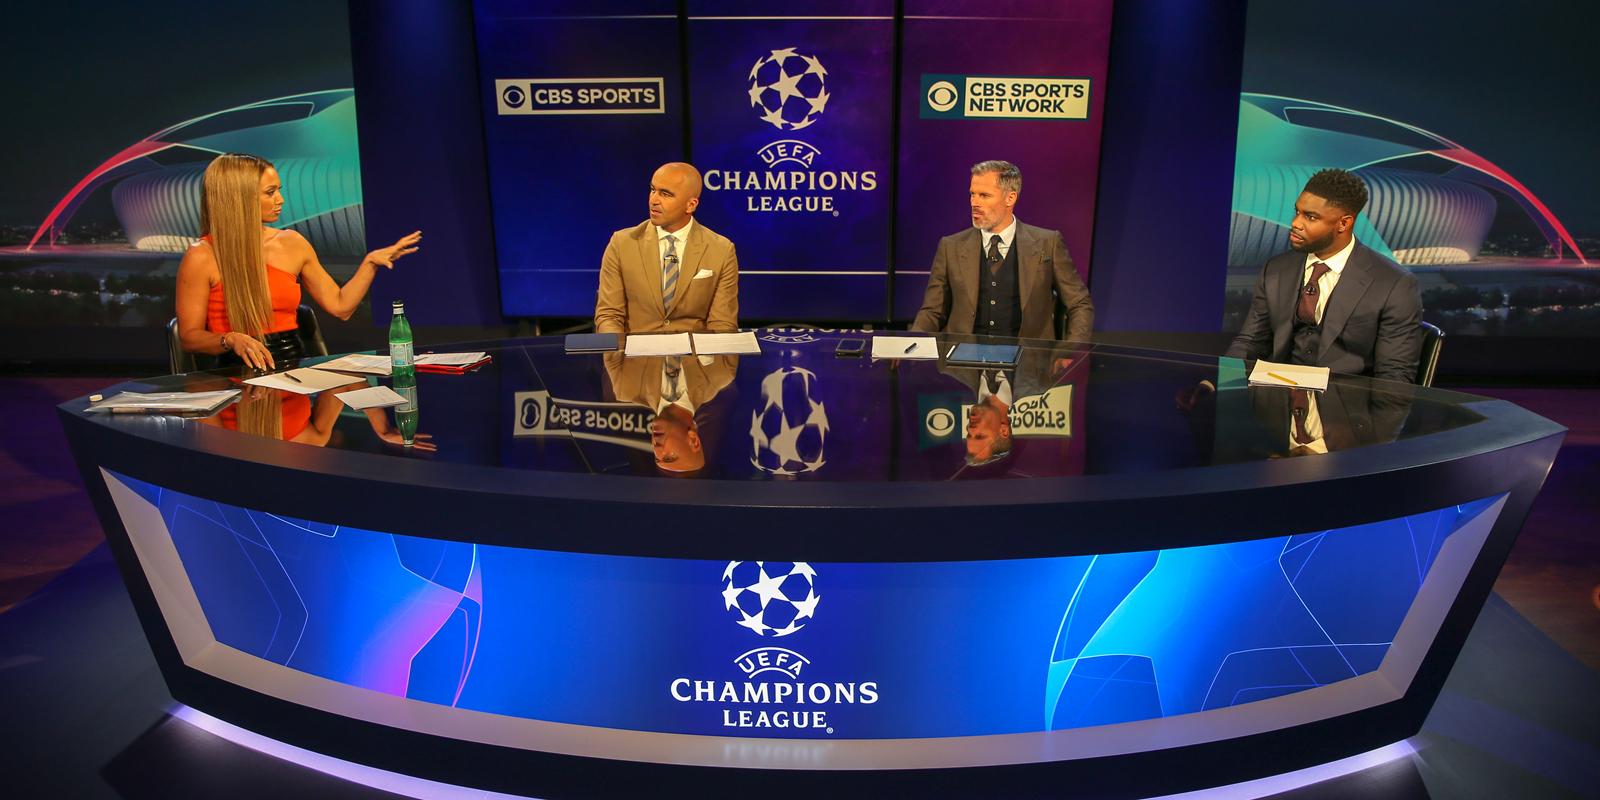 A Look Inside the UEFA Partnership with CBS All Access and CBS Sports